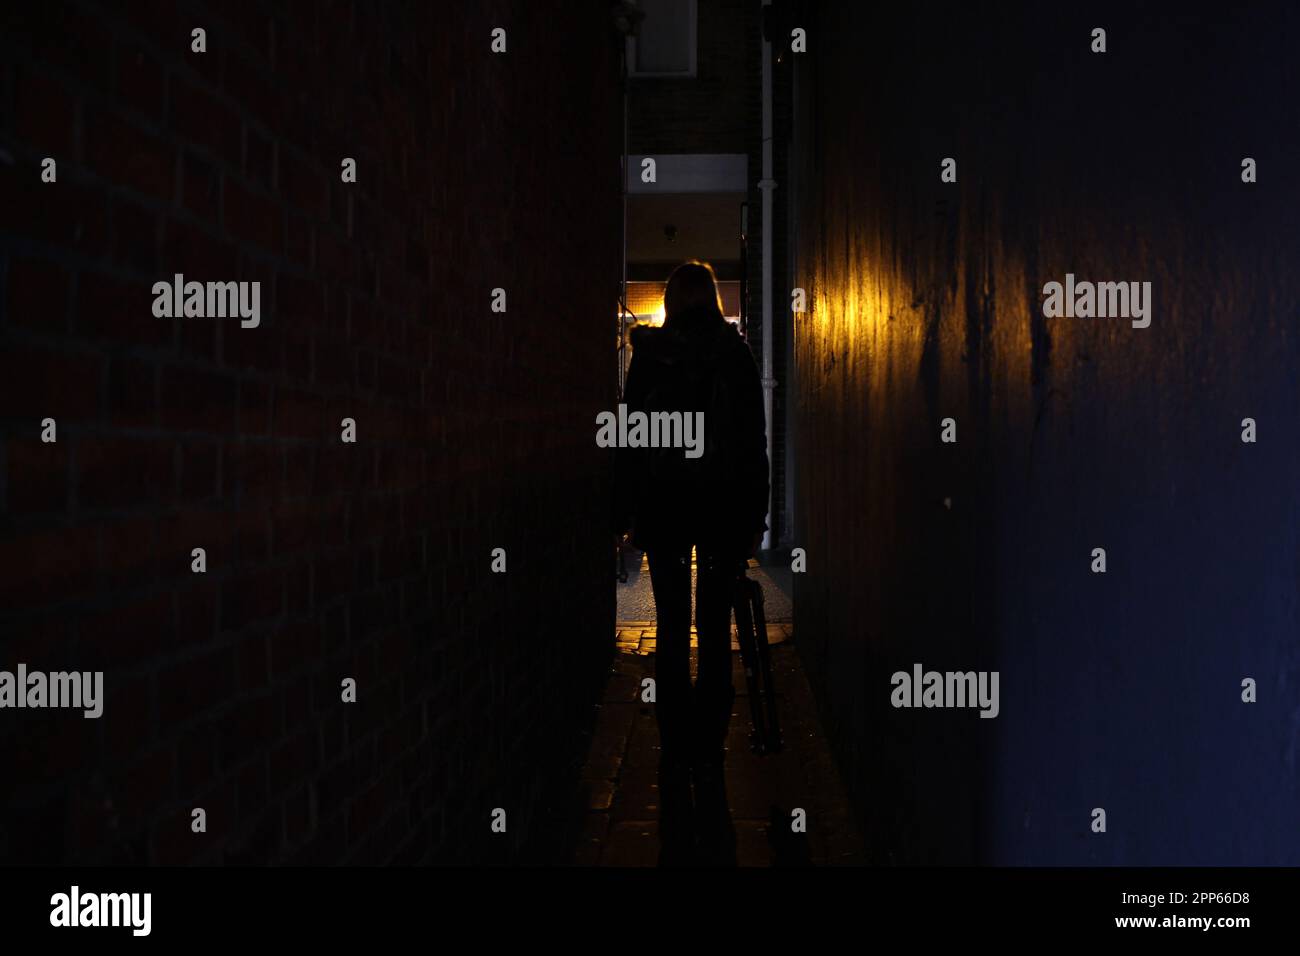 Woman in a dark alleyway at night Stock Photo